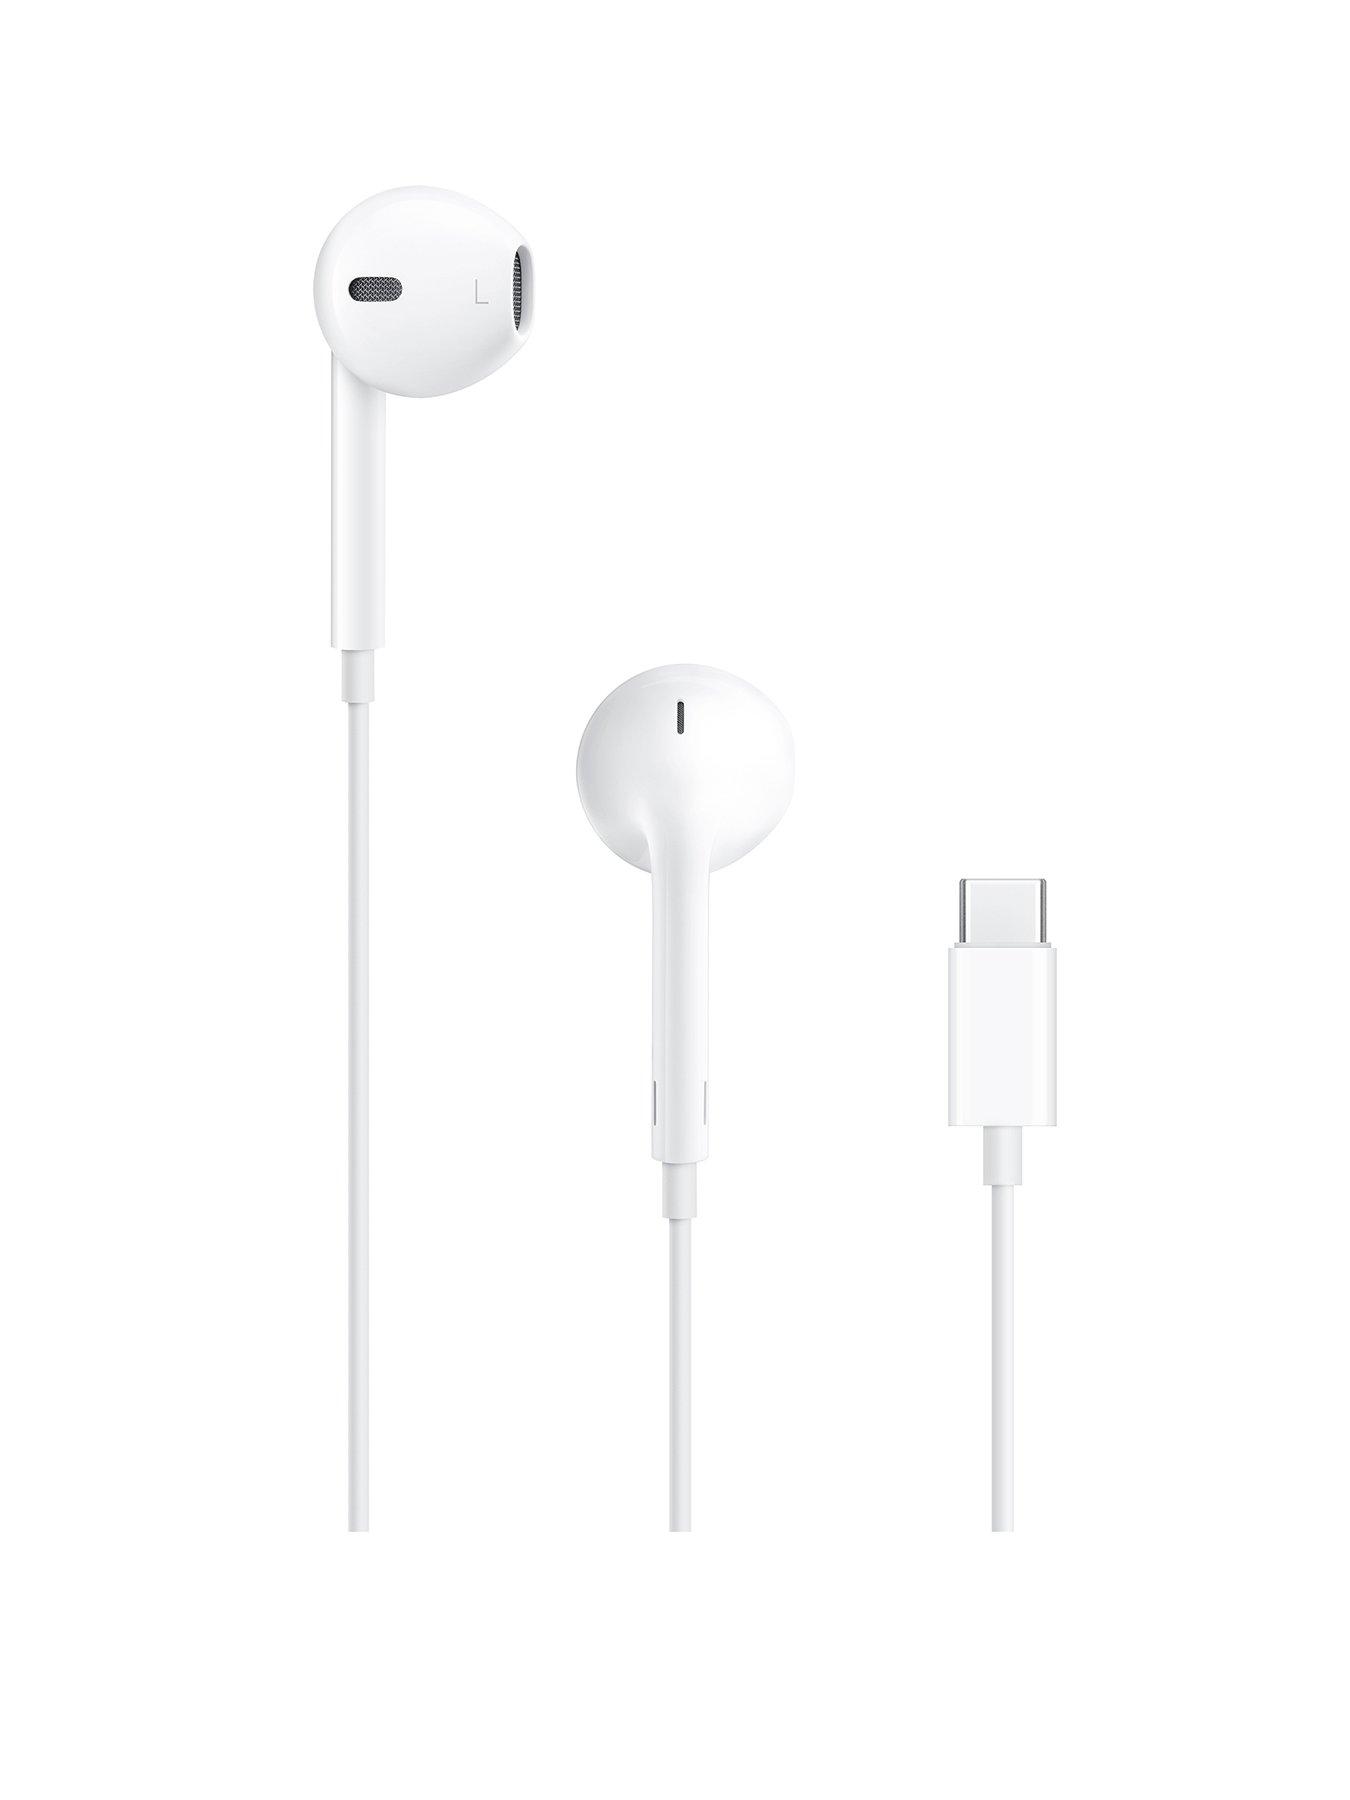 Apple, Airpods, Airpods Pro, Airpods Max